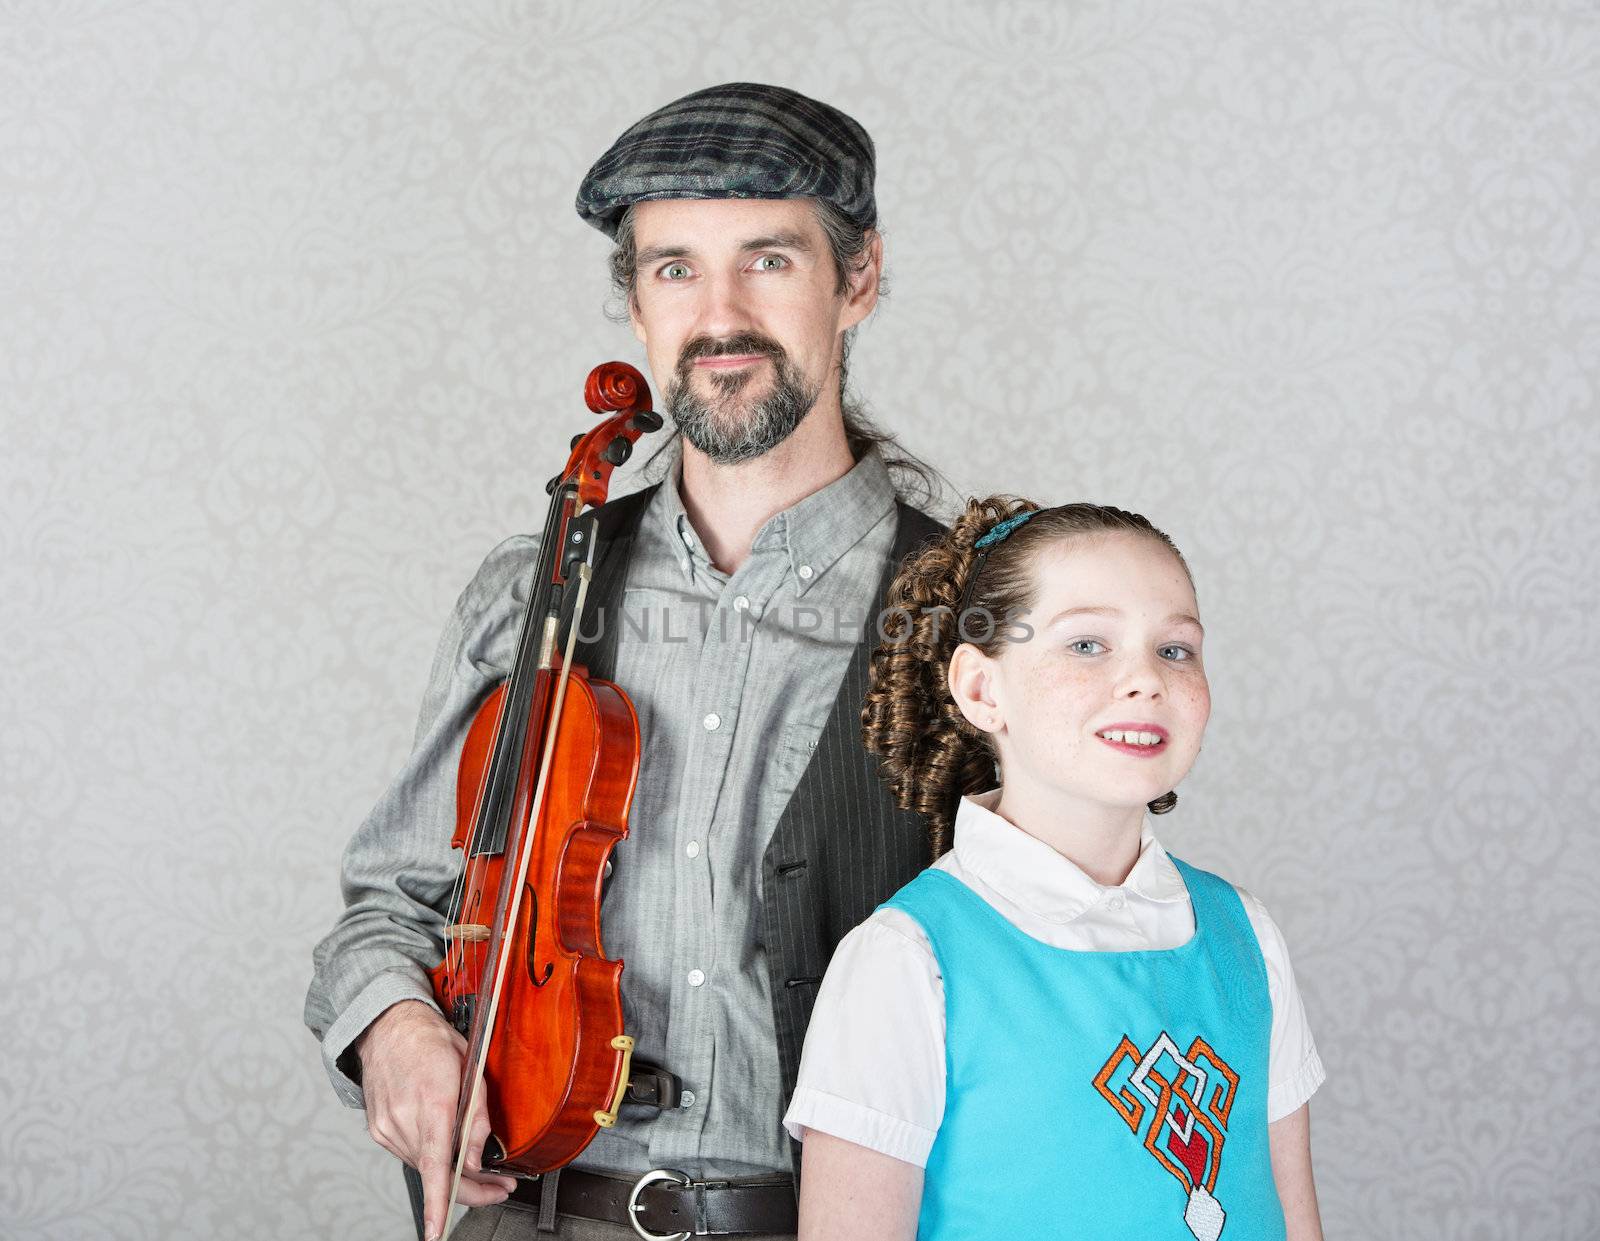 Celtic Folk Performer with Child by Creatista